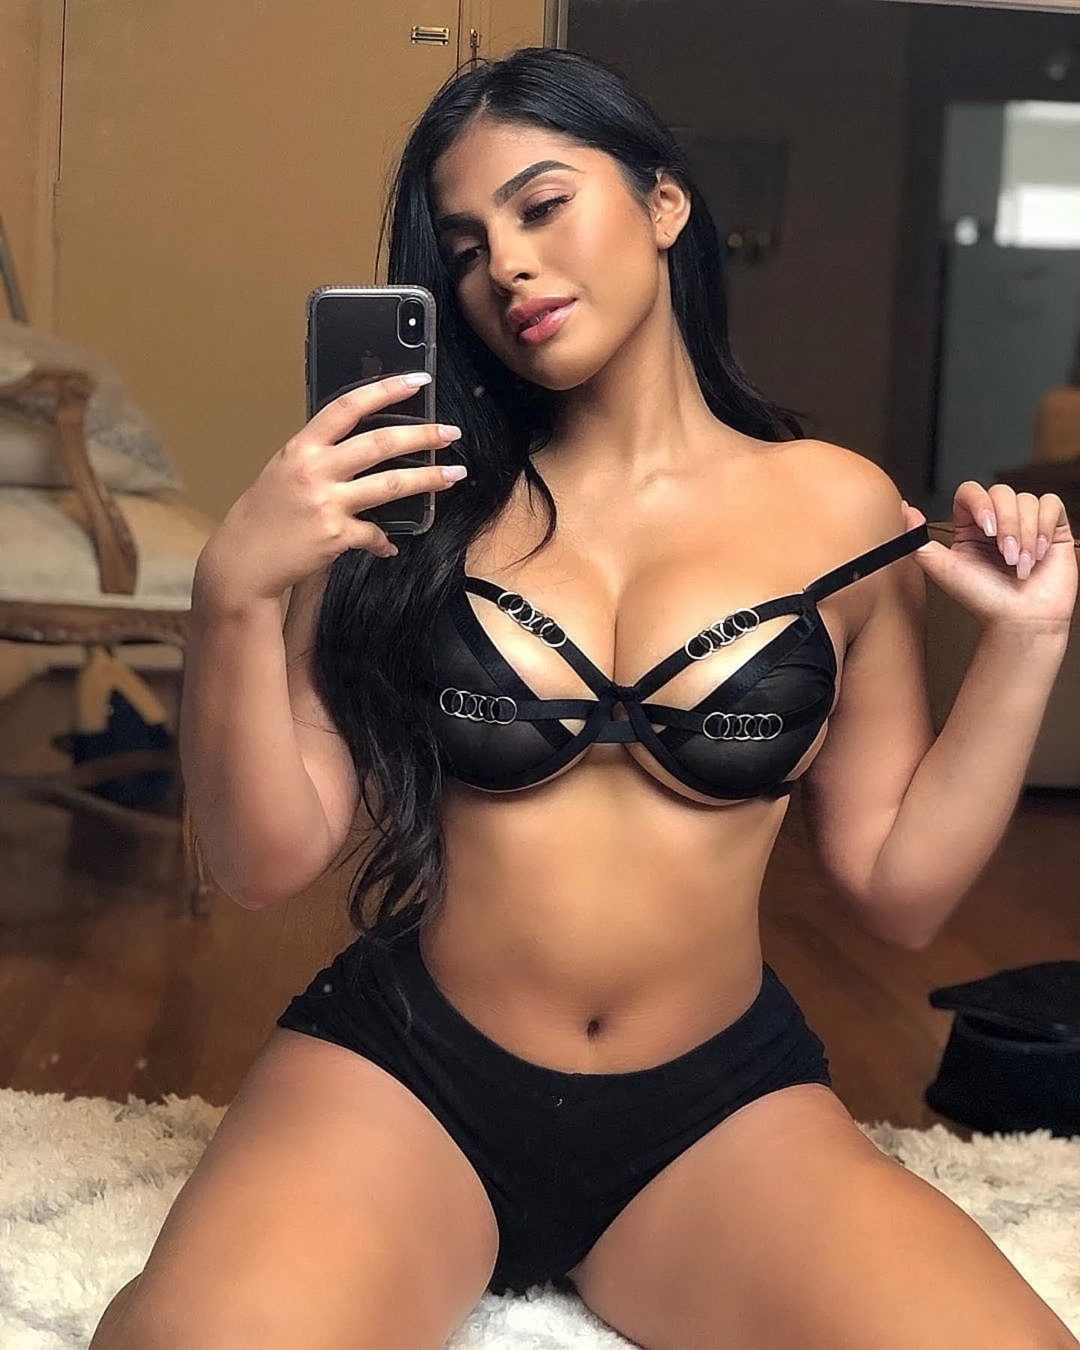 FULL VIDEO: Natalia Skye Nude Onlyfans With Tyga Leaked!